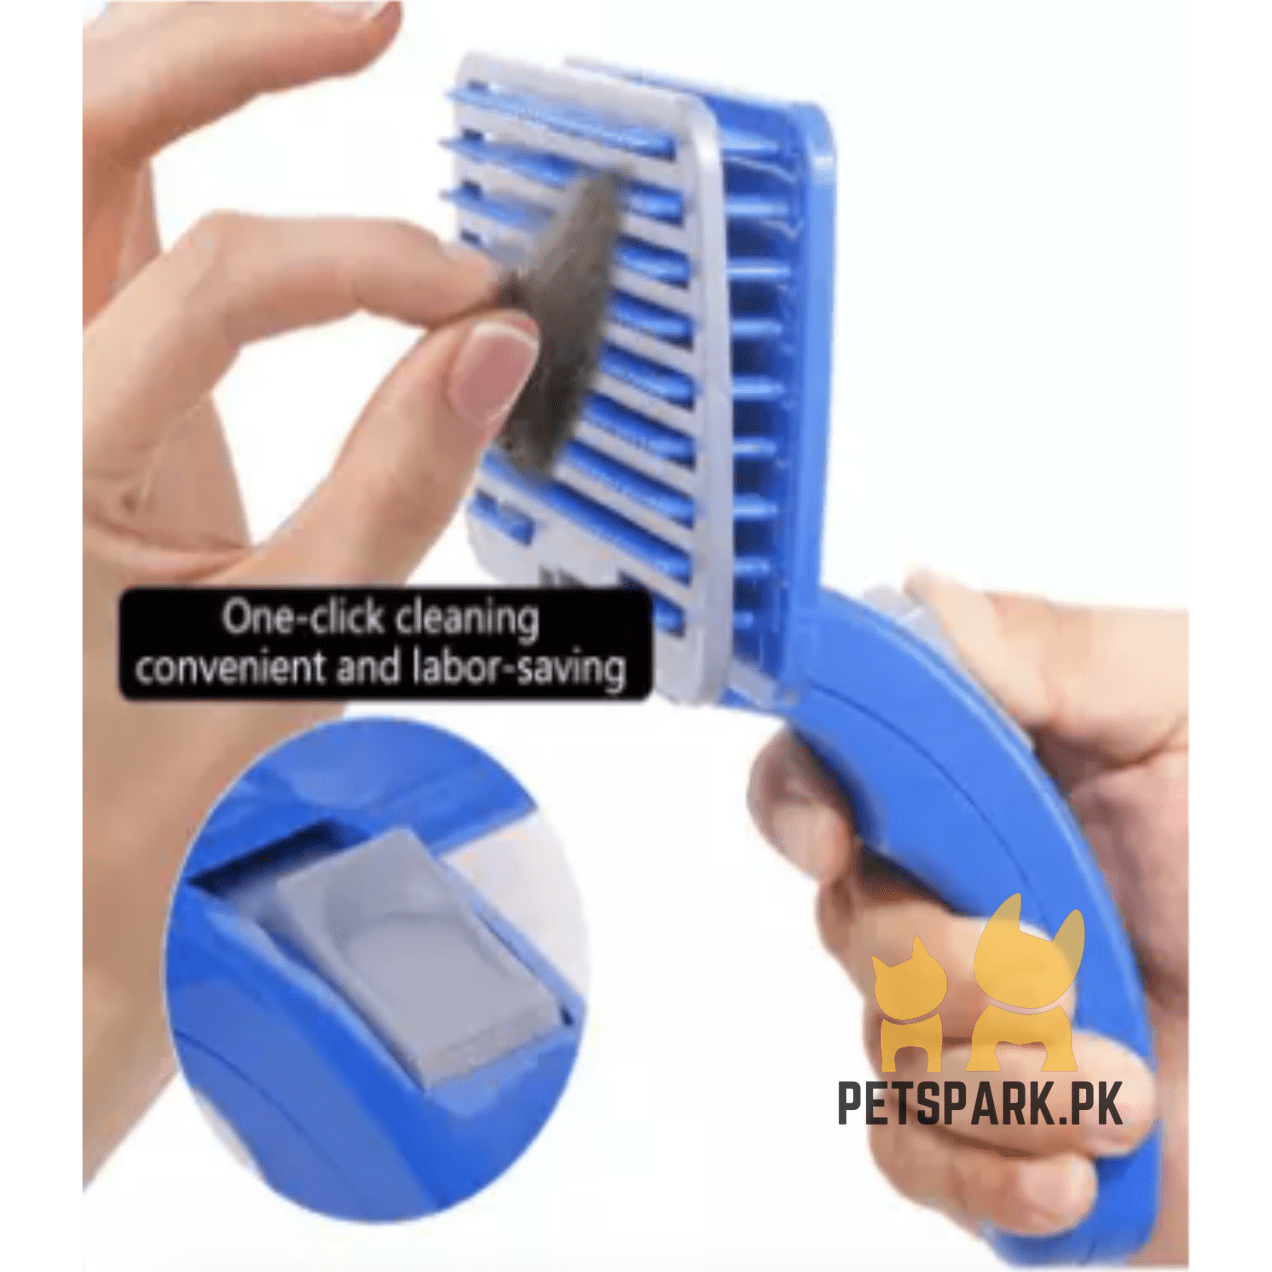 Blue Button Slicker Brush for Cats and Dogs pets-park-pk